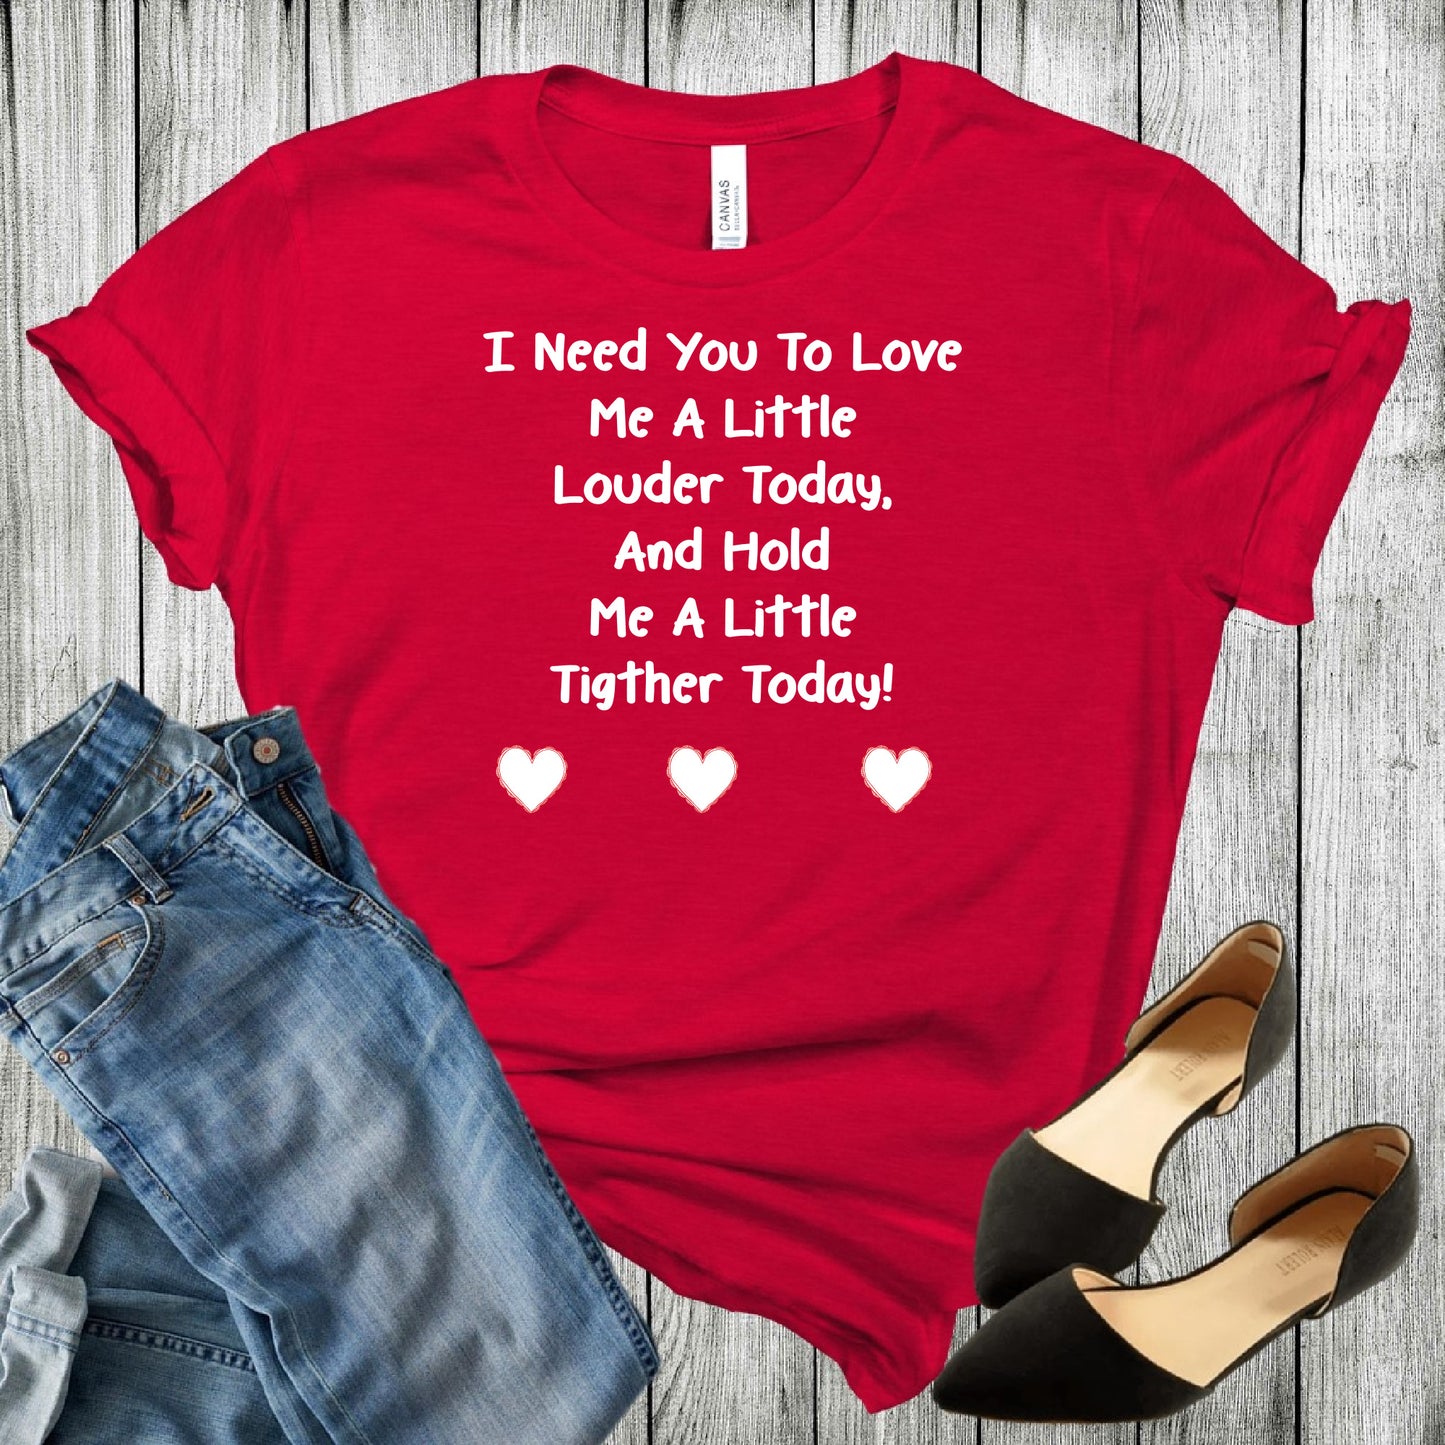 Grit City Rebel red Love me a little louder today and hold me a little tighter today unisex TShirt in sizing small to 3X